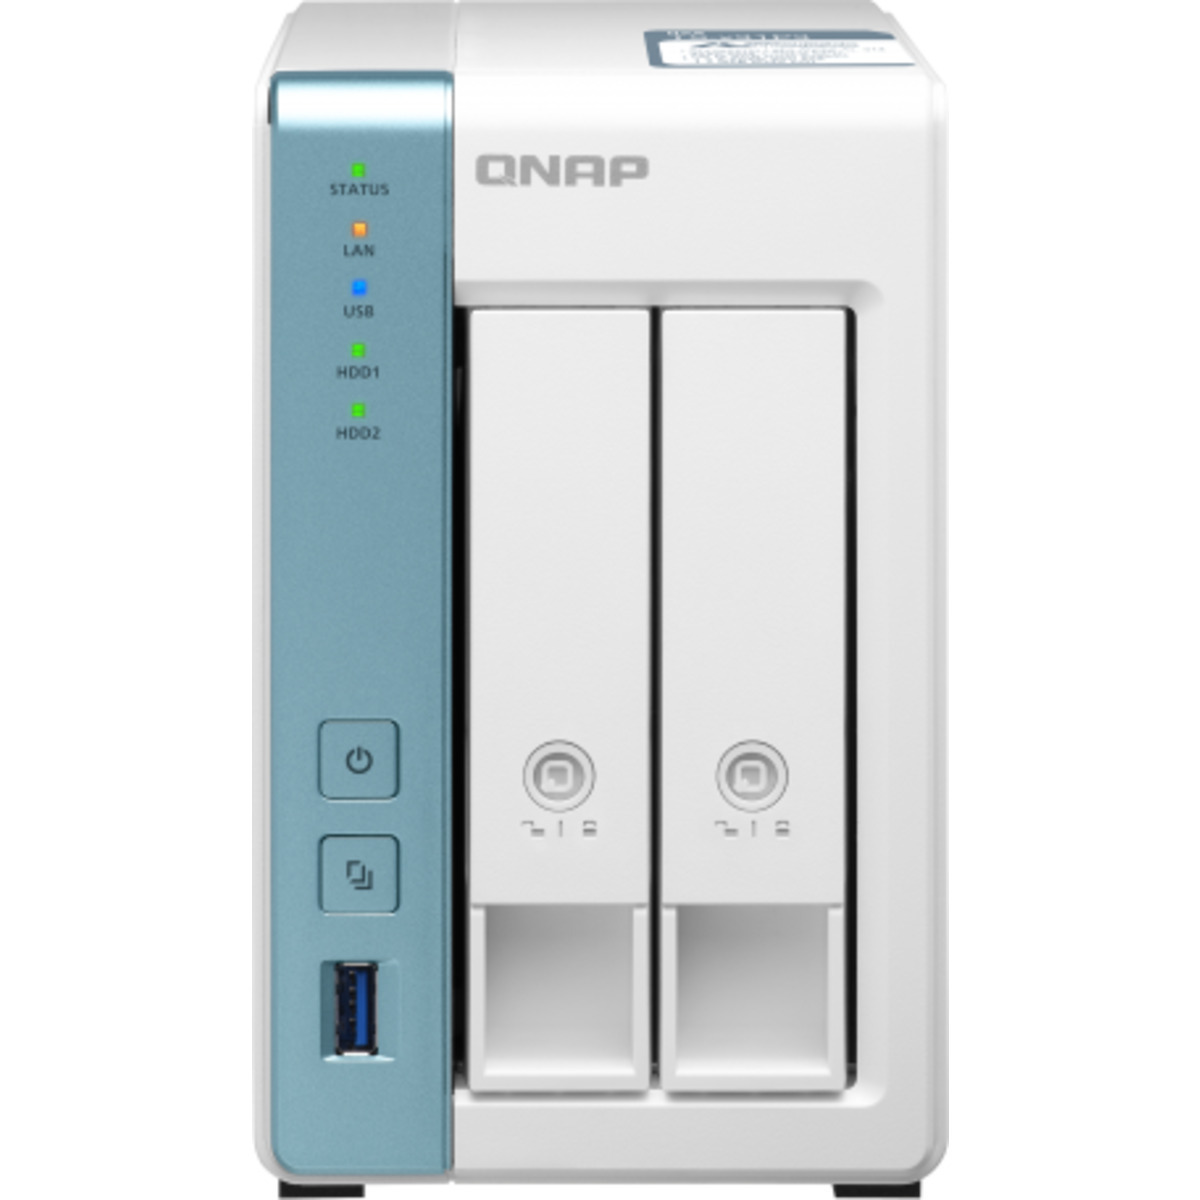 buy $879 QNAP TS-231P3 16tb Desktop NAS - Network Attached Storage Device 2x8000gb Western Digital Ultrastar DC HC320 HUS728T8TALE6L4 3.5 7200rpm SATA 6Gb/s HDD ENTERPRISE Class Drives Installed - Burn-In Tested - FREE RAM UPGRADE - nas headquarters buy network attached storage server device das new raid-5 free shipping usa christmas new year holiday sale TS-231P3